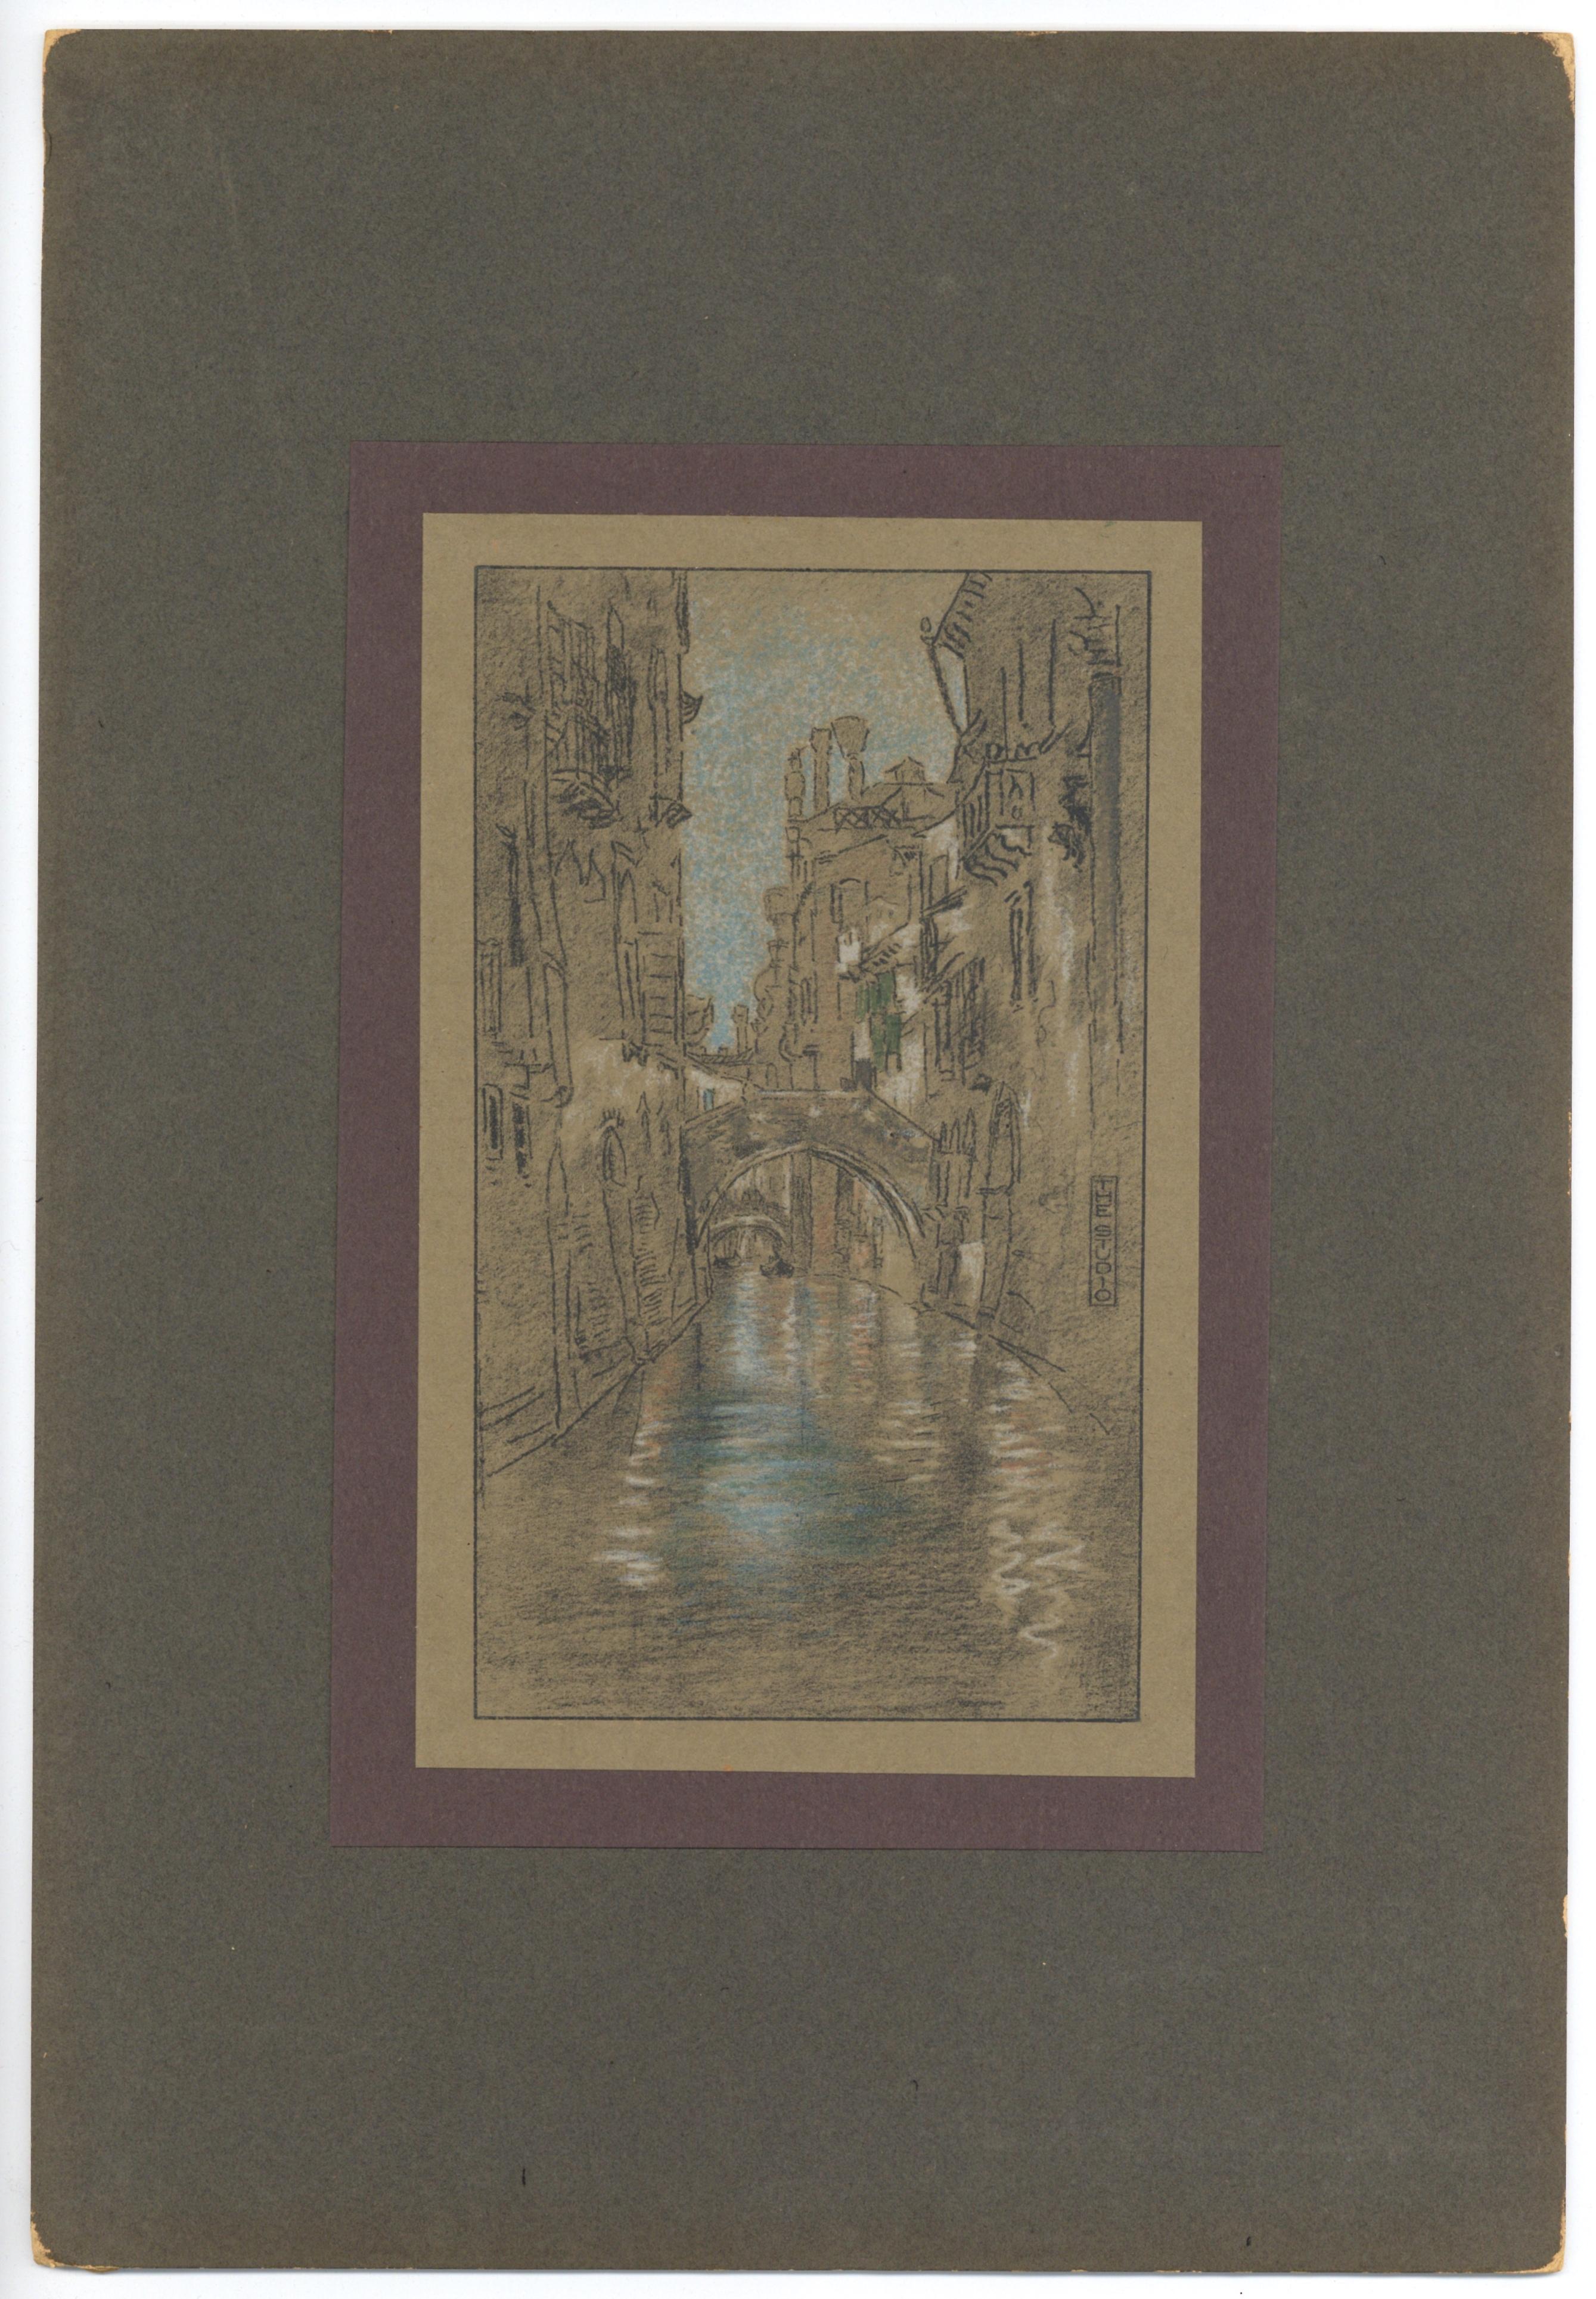 Medium: lithograph (after the pastel). The lithography was executed by Whistler's friend and fellow artist Thomas Way, and published in London by The Studio in 1905 for a rare deluxe portfolio. Printed on smooth wove paper, the lithograph measures 8